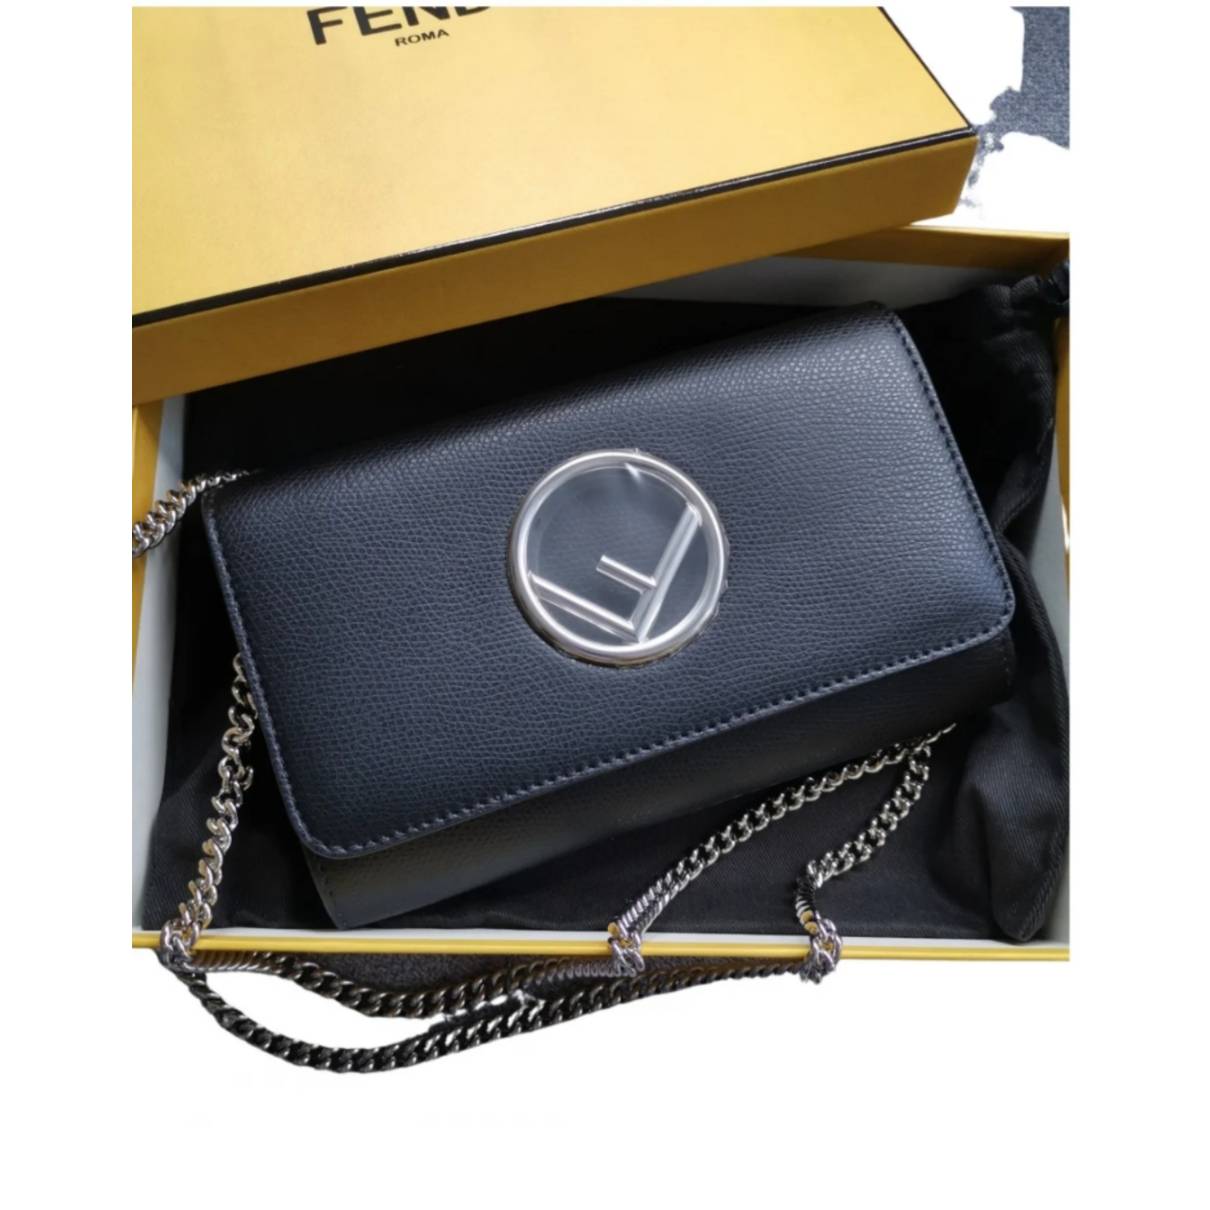 Fendi - Authenticated Wallet on Chain Handbag - Leather Grey for Women, Never Worn